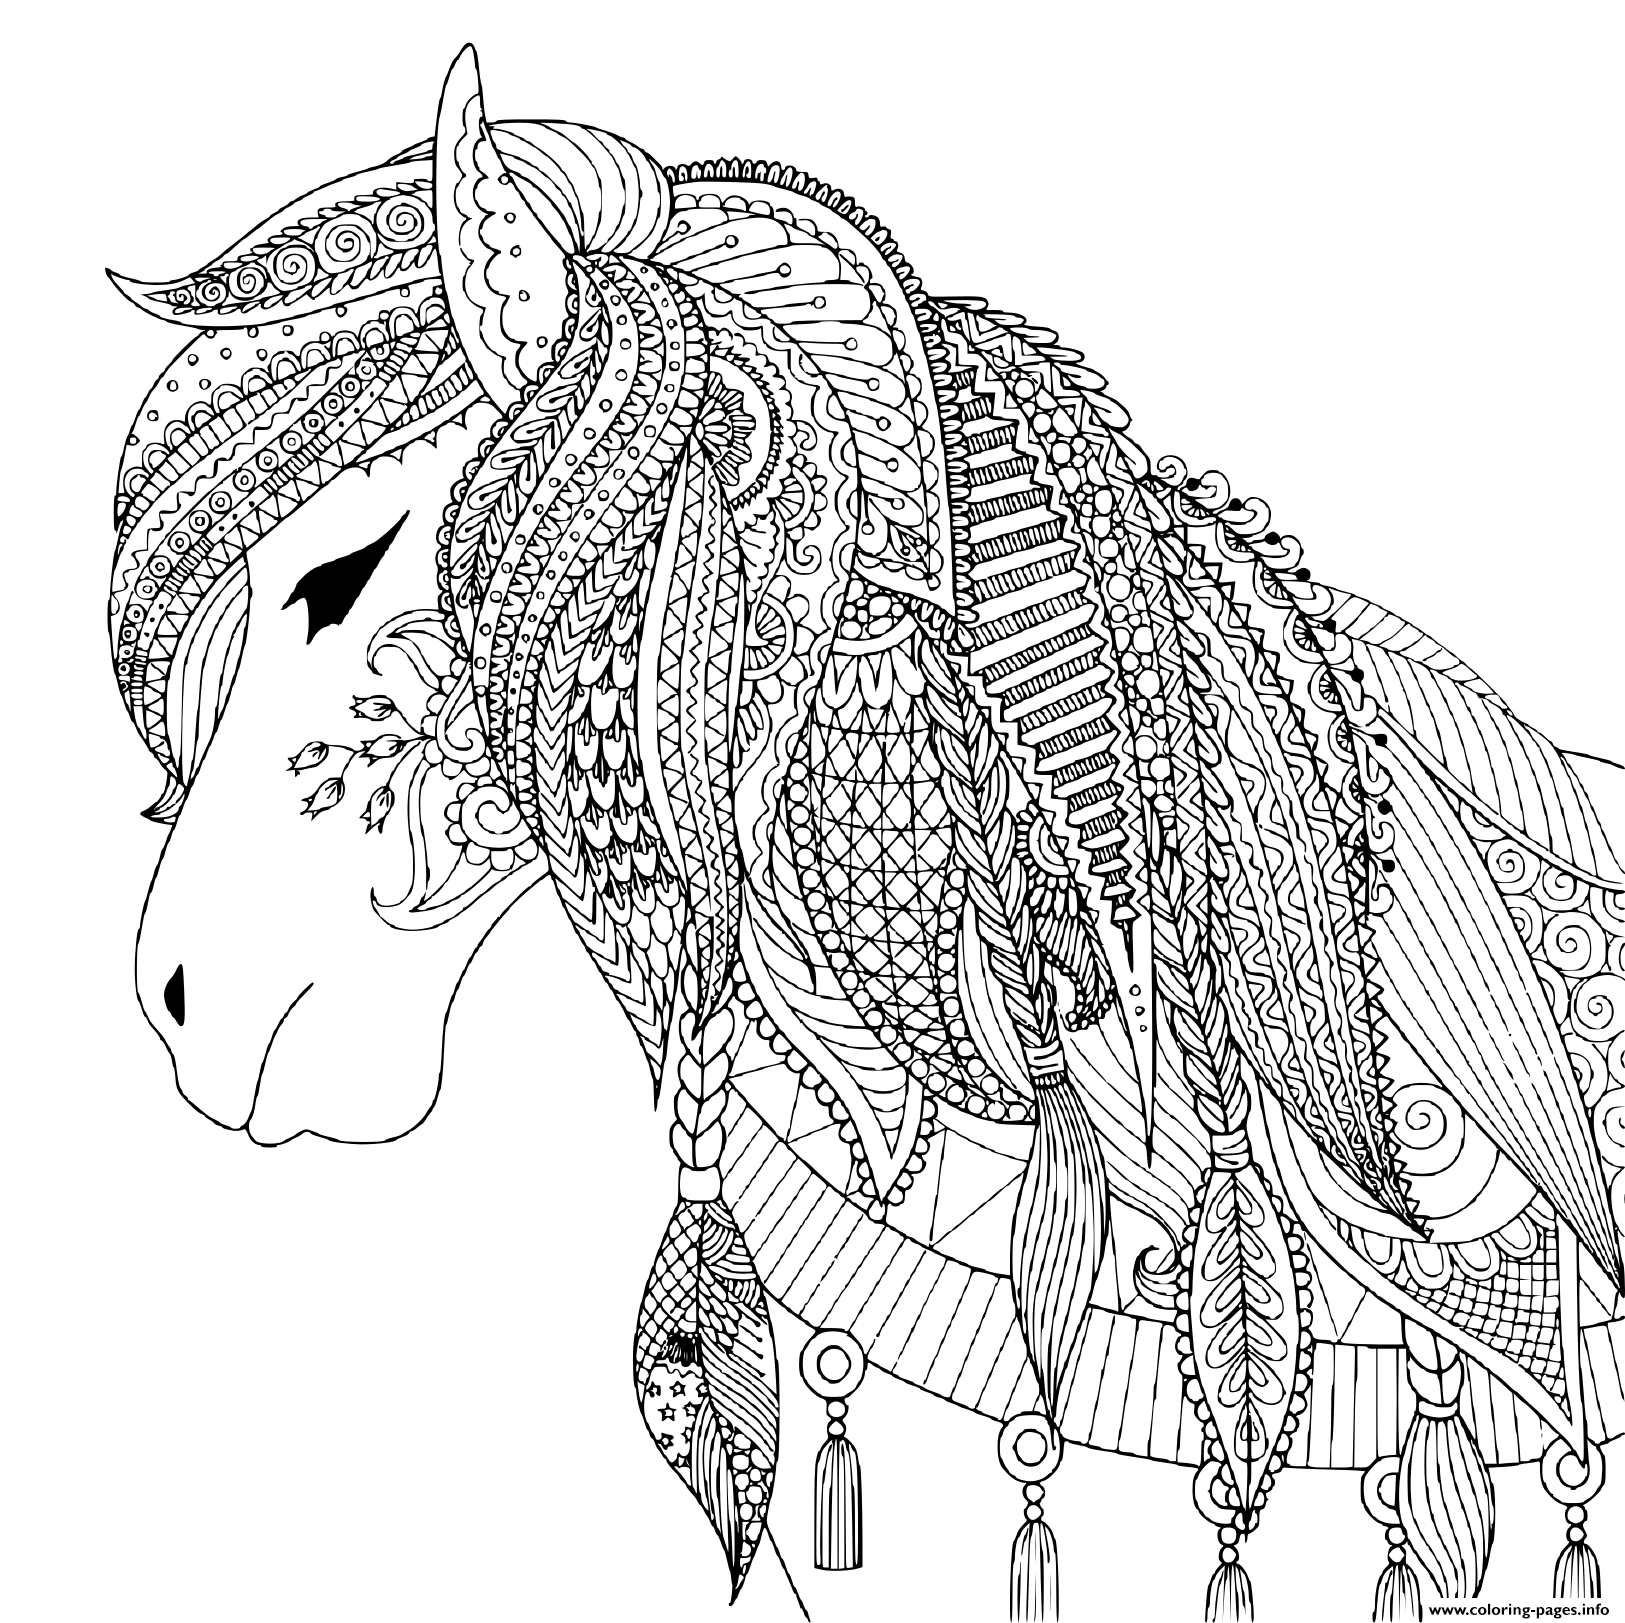 Zendoodle Design Of Horse For Adult Coloring Pages Printable